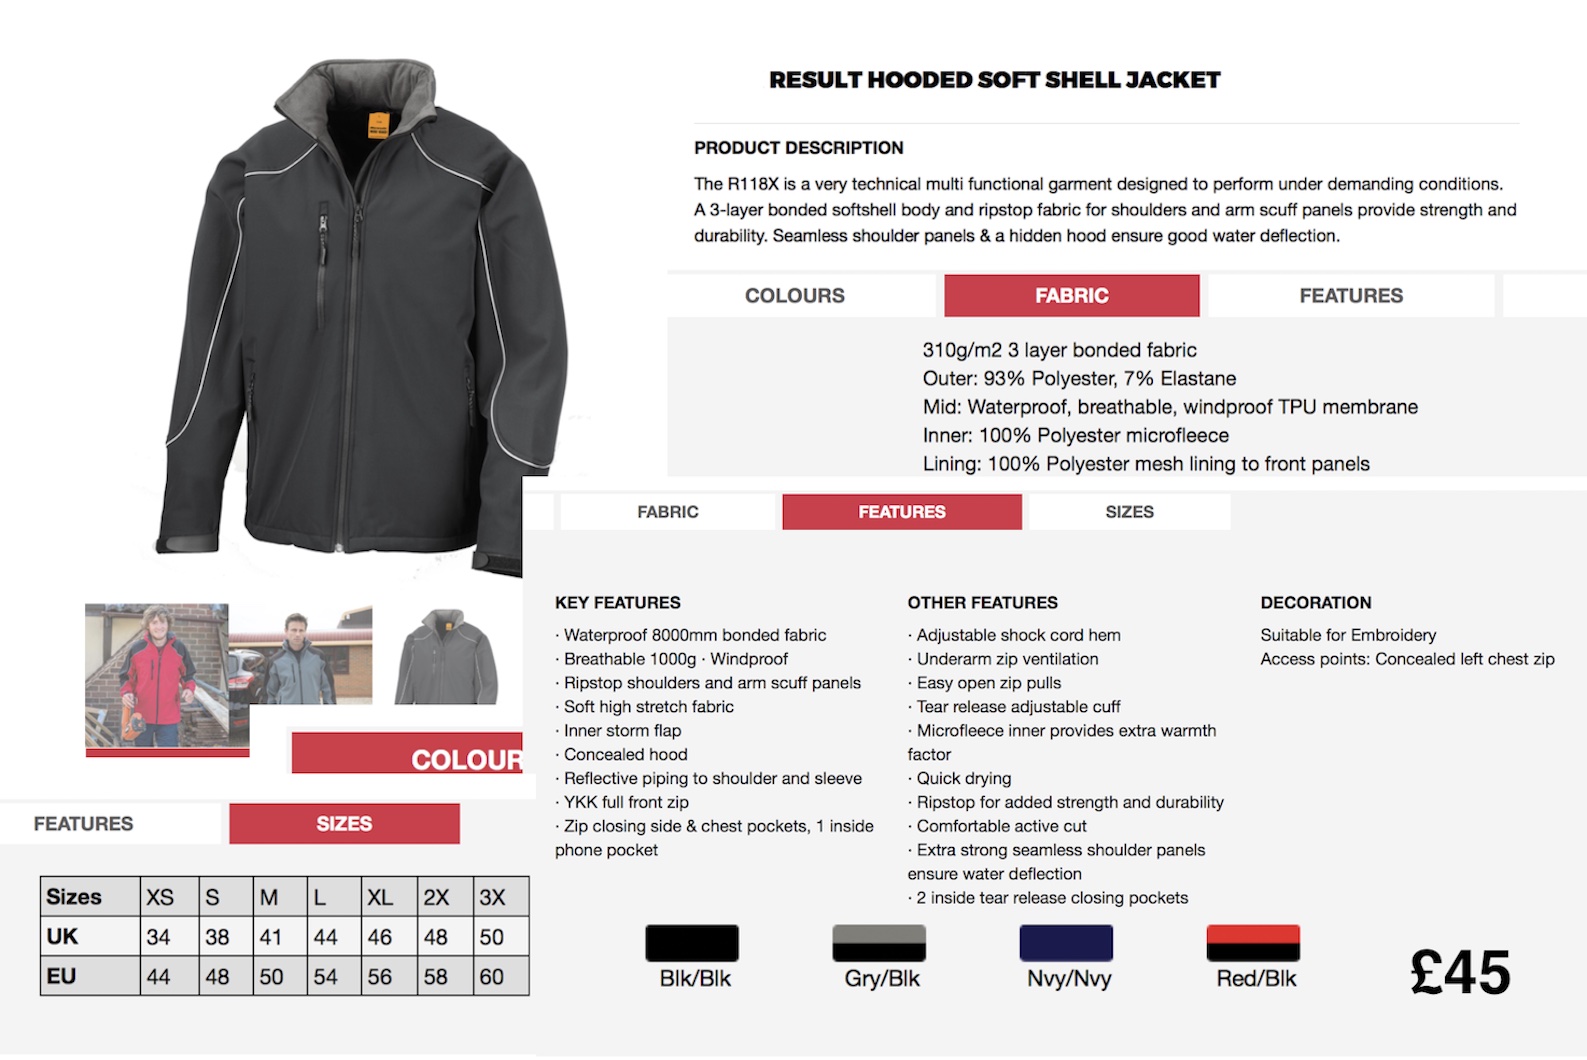 embroidered soft shell jackets custom embroidery service clothing uniform workwear